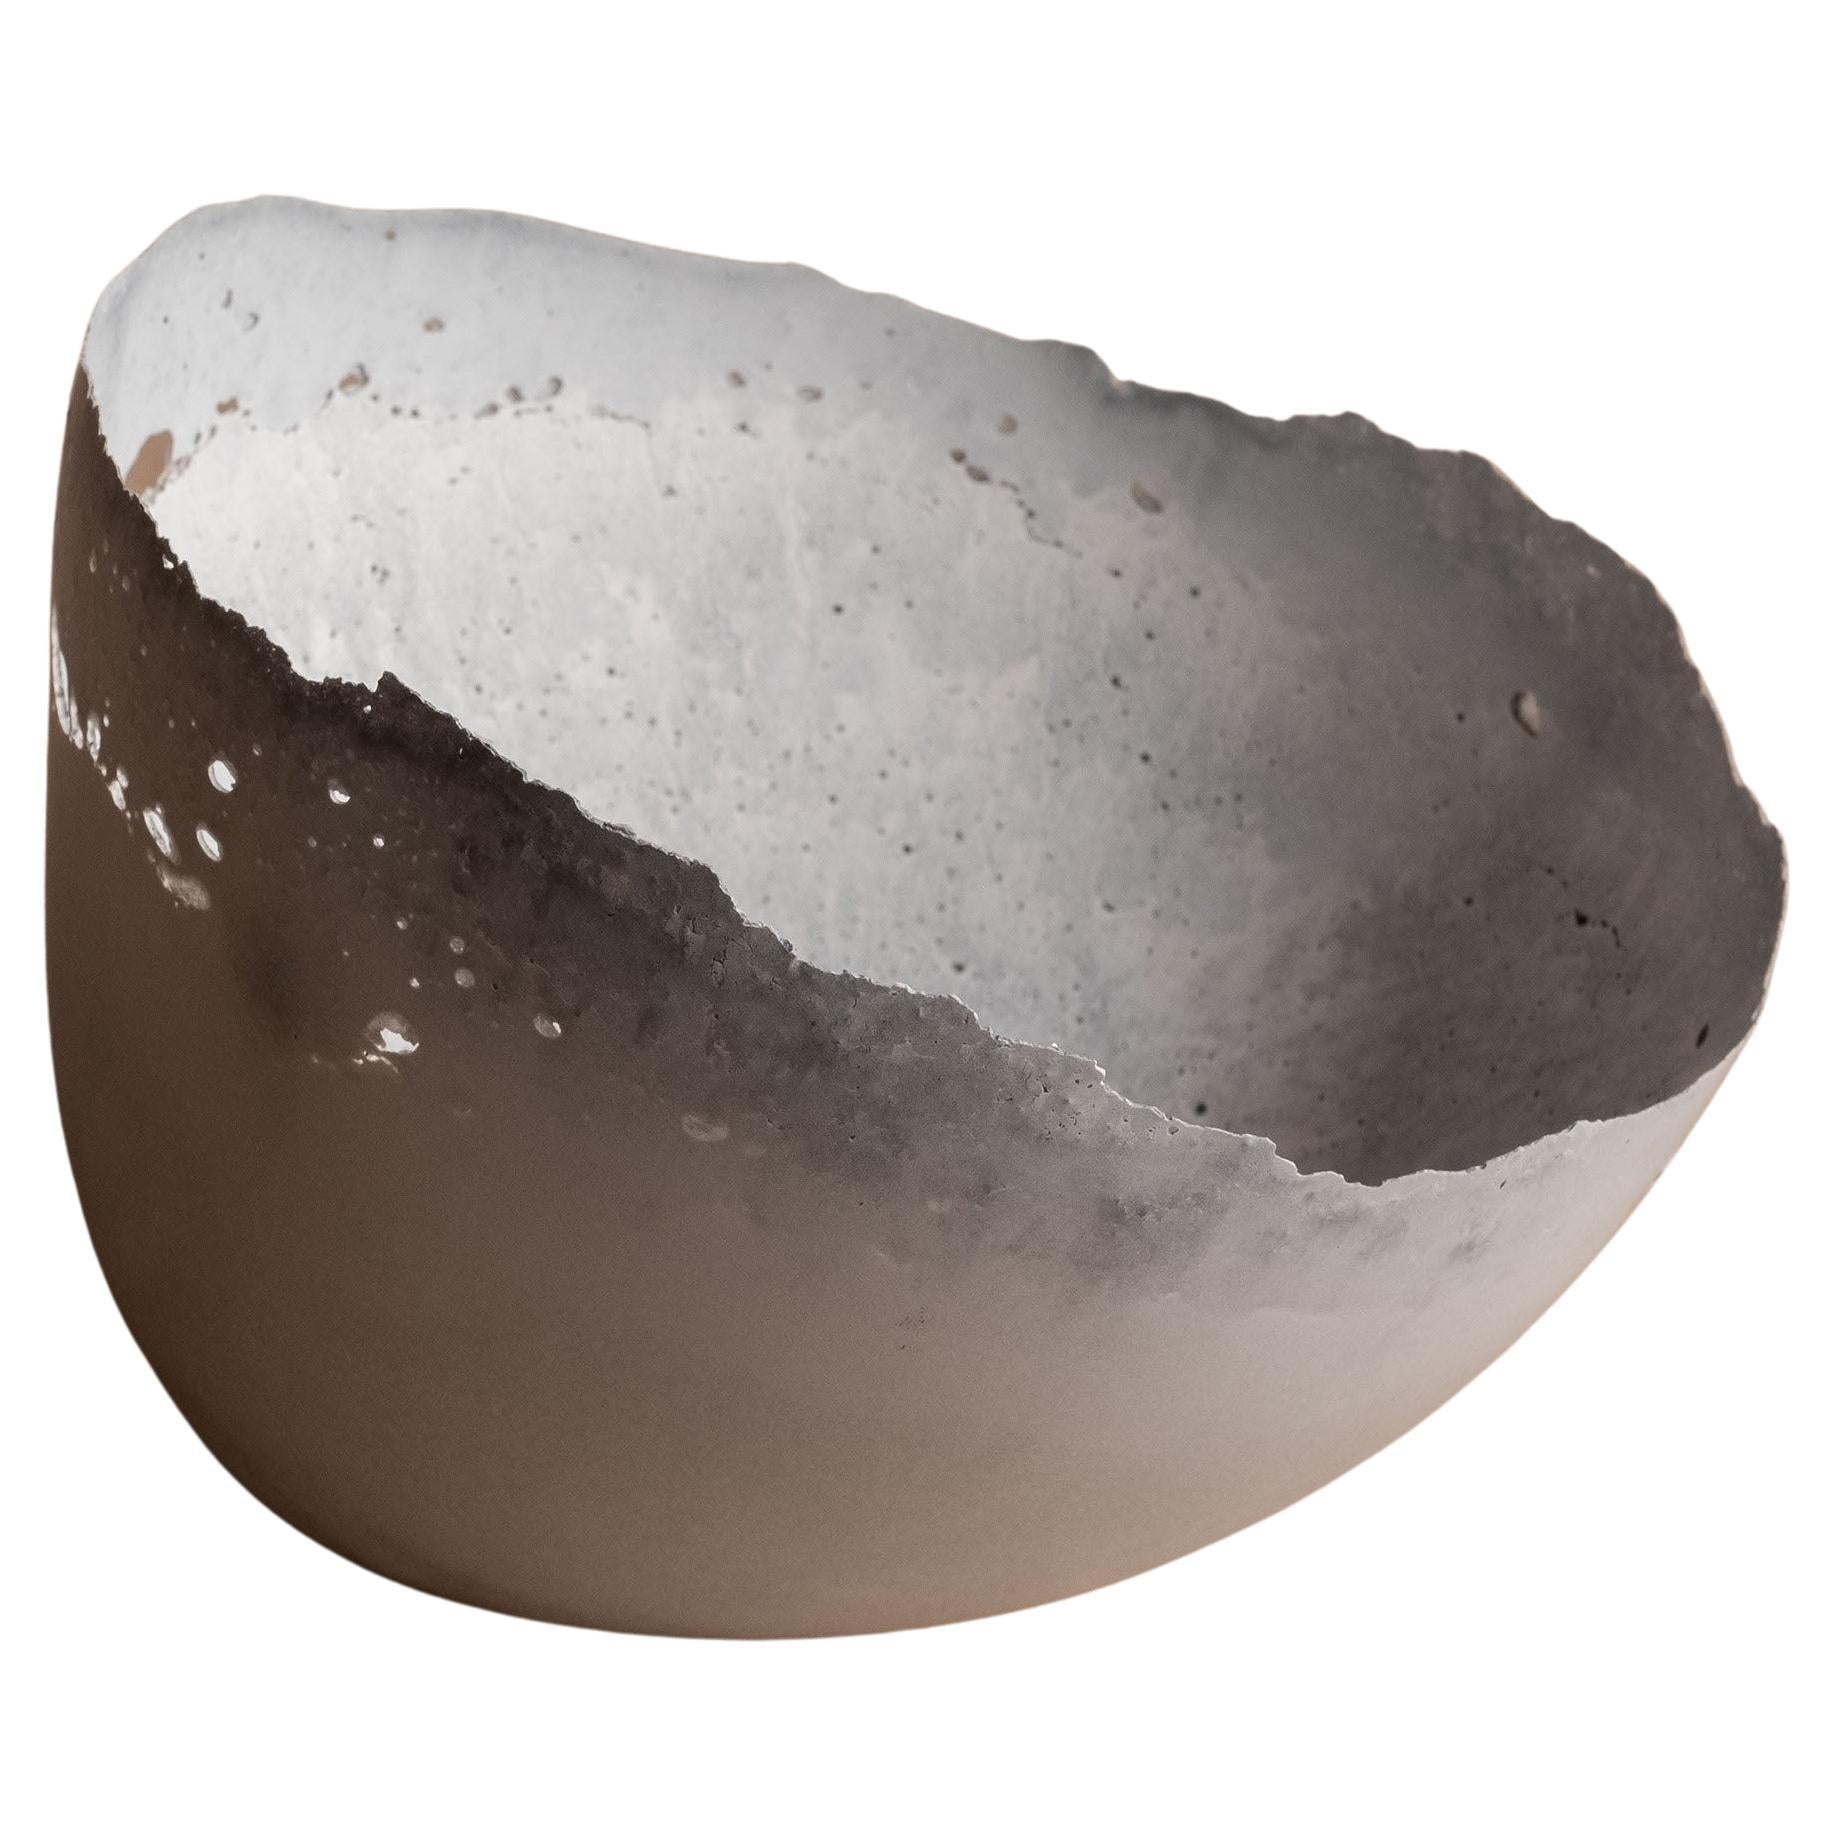 Handmade Cast Concrete Bowl in Grey by UME Studio For Sale